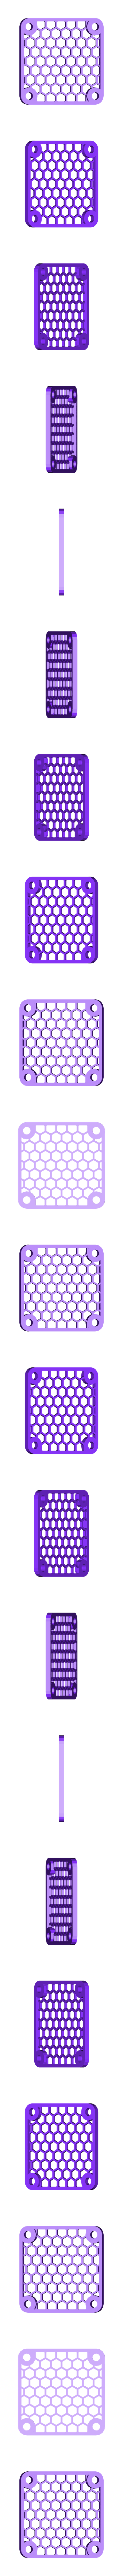 50mm_honeycomb_reduced_fan_cover.stl Download free STL file Customizable Fan Grill Cover • 3D print design, MightyNozzle